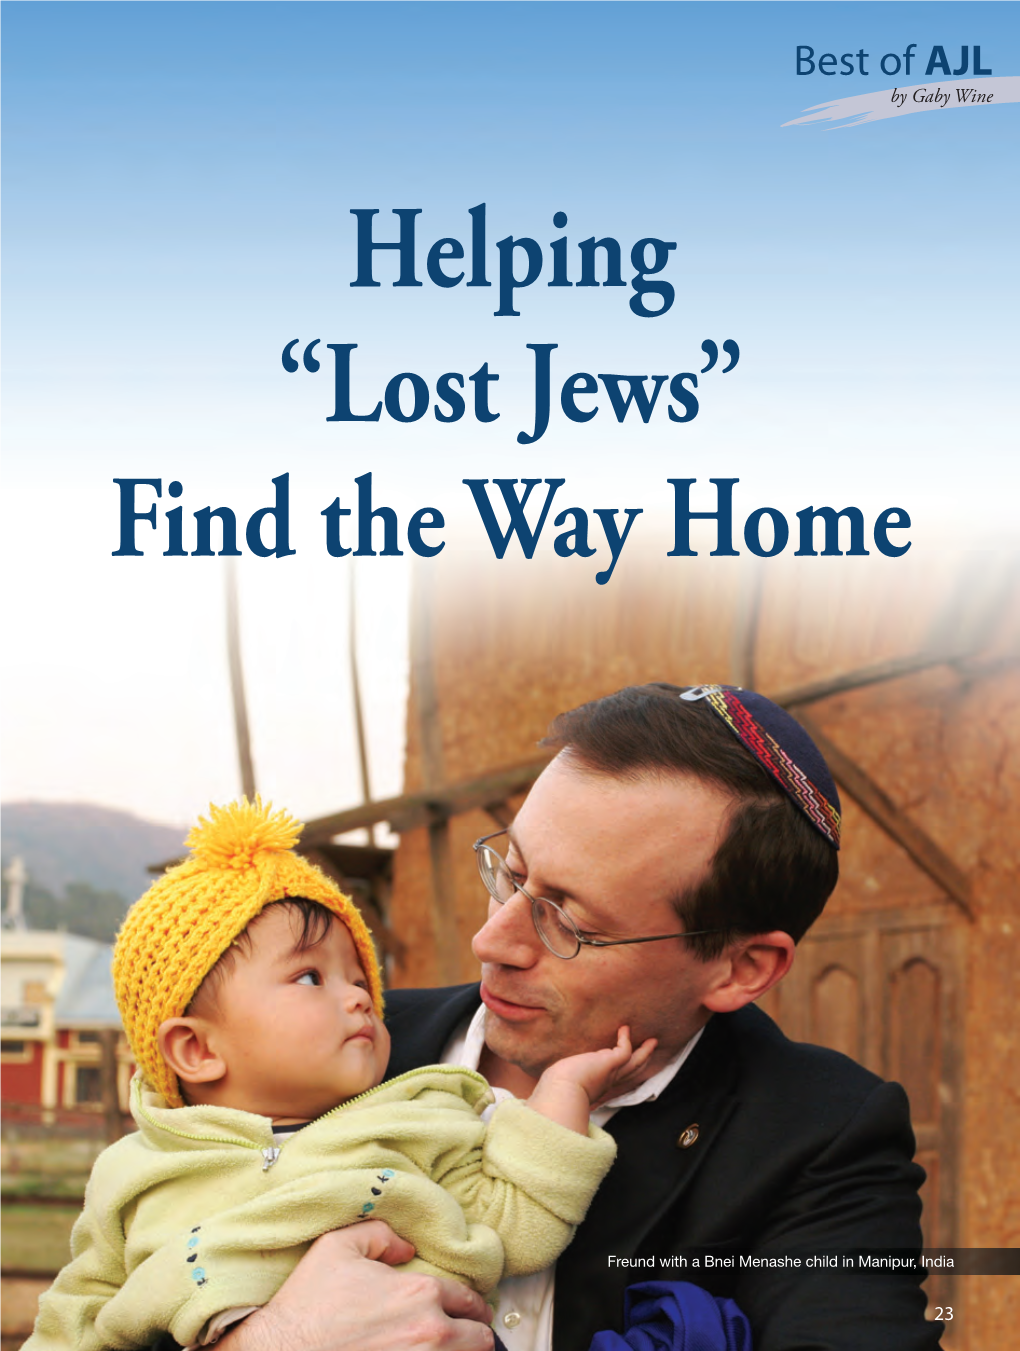 Lost Jews” Find the Way Home